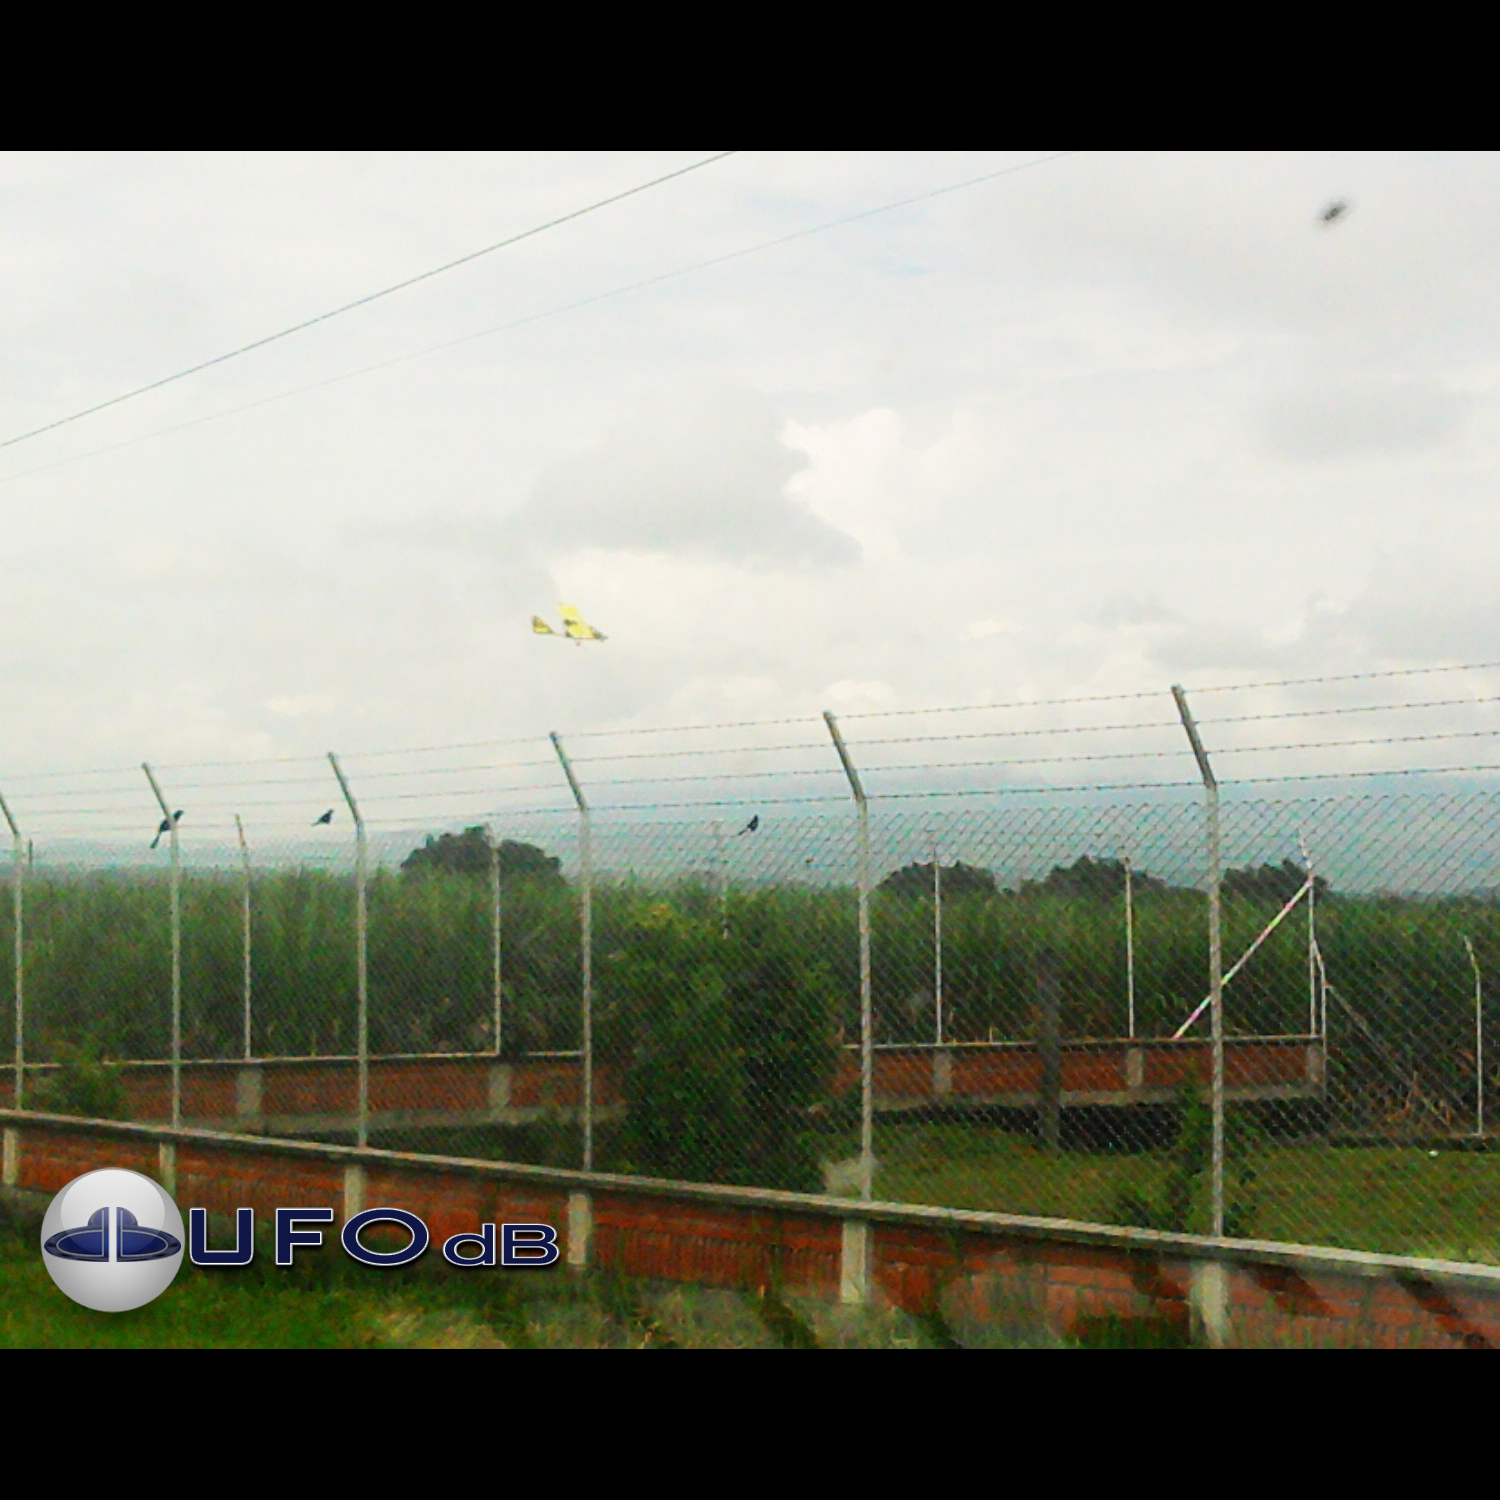 While looking at planes a Man see a UFO - Cauca, Colombia - March 2011 UFO Picture #280-1